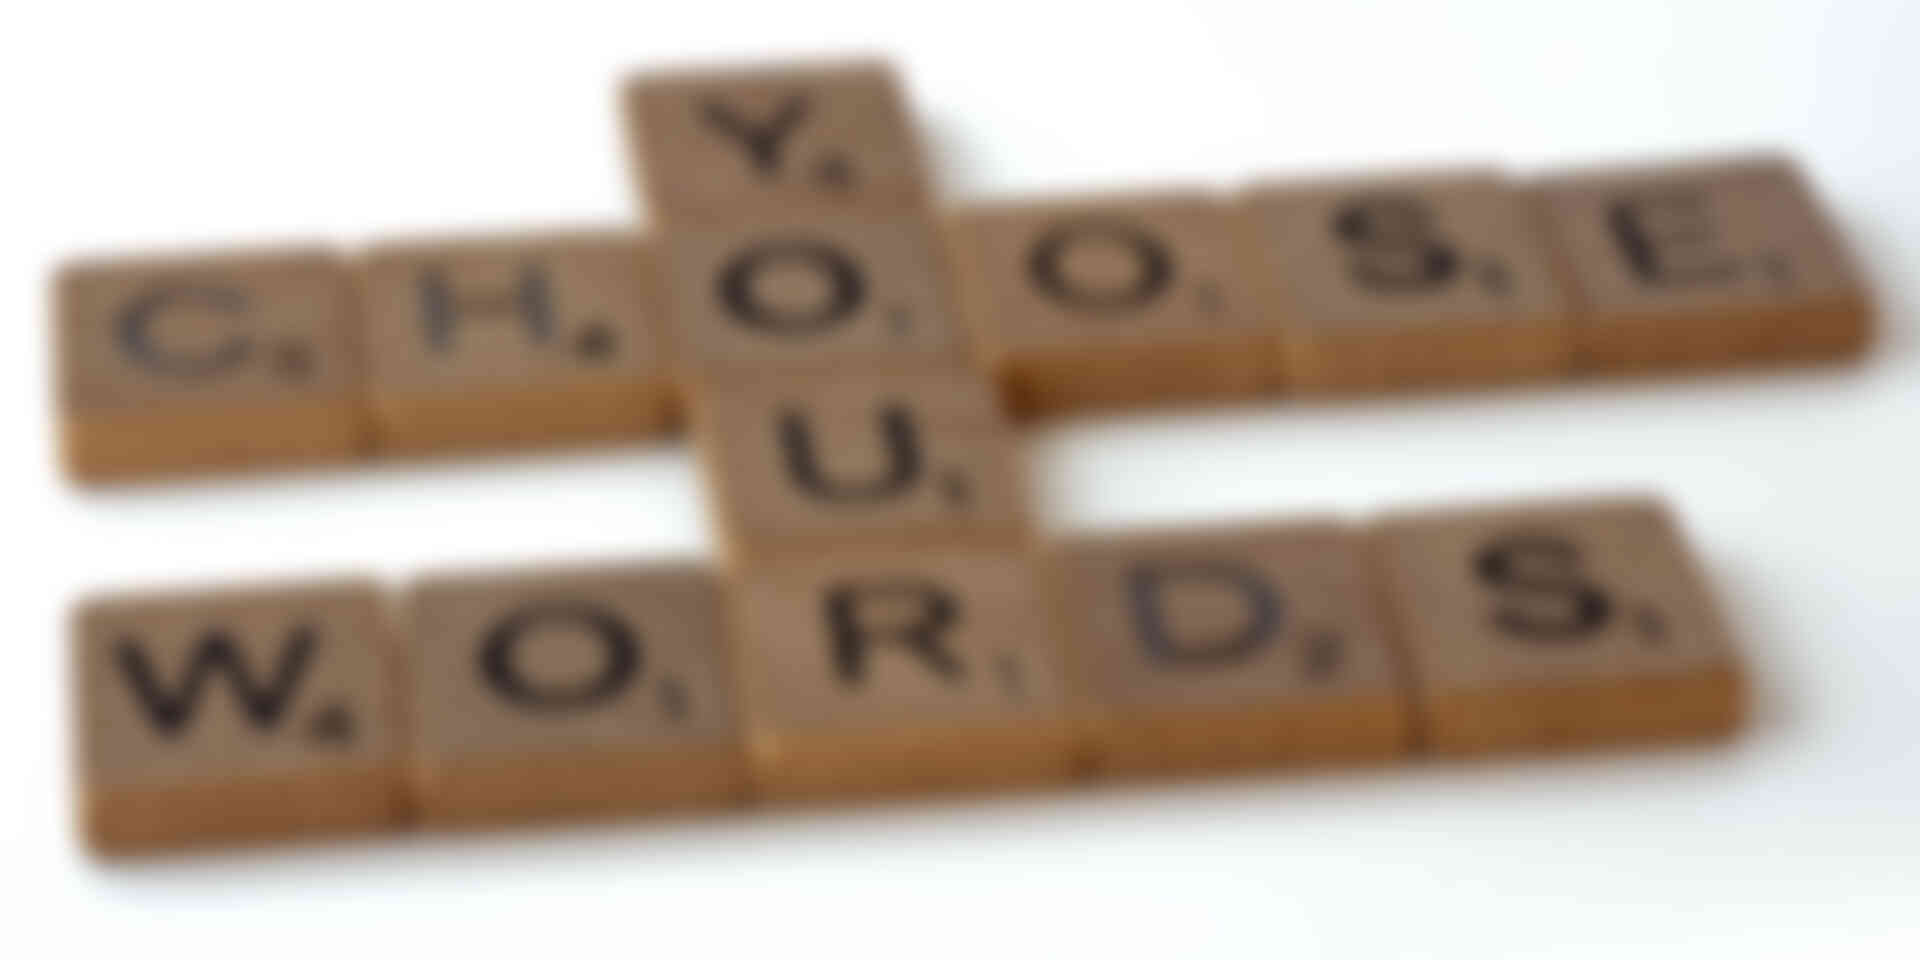 Further reading for writers - choose-your-words-game-pieces